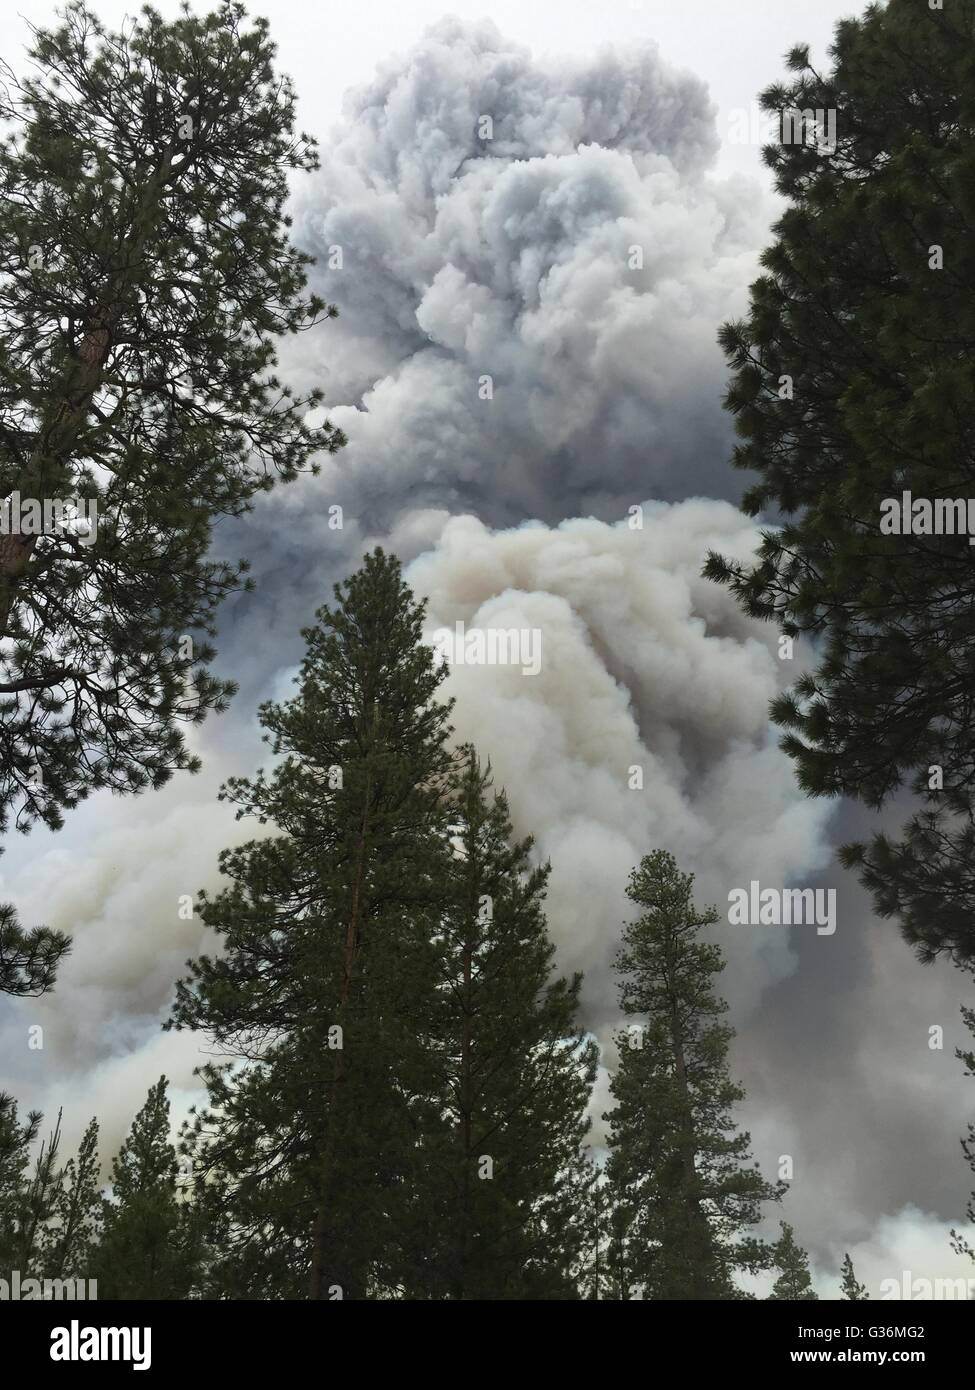 Giant clouds of smoke rise up from the Draw Fire in the Fremont Winema National Forest June 8, 2015 in Chiloquin, Oregon. The fire was ignited by lightening and is growing rapidly due to hot dry and windy conditions. Stock Photo